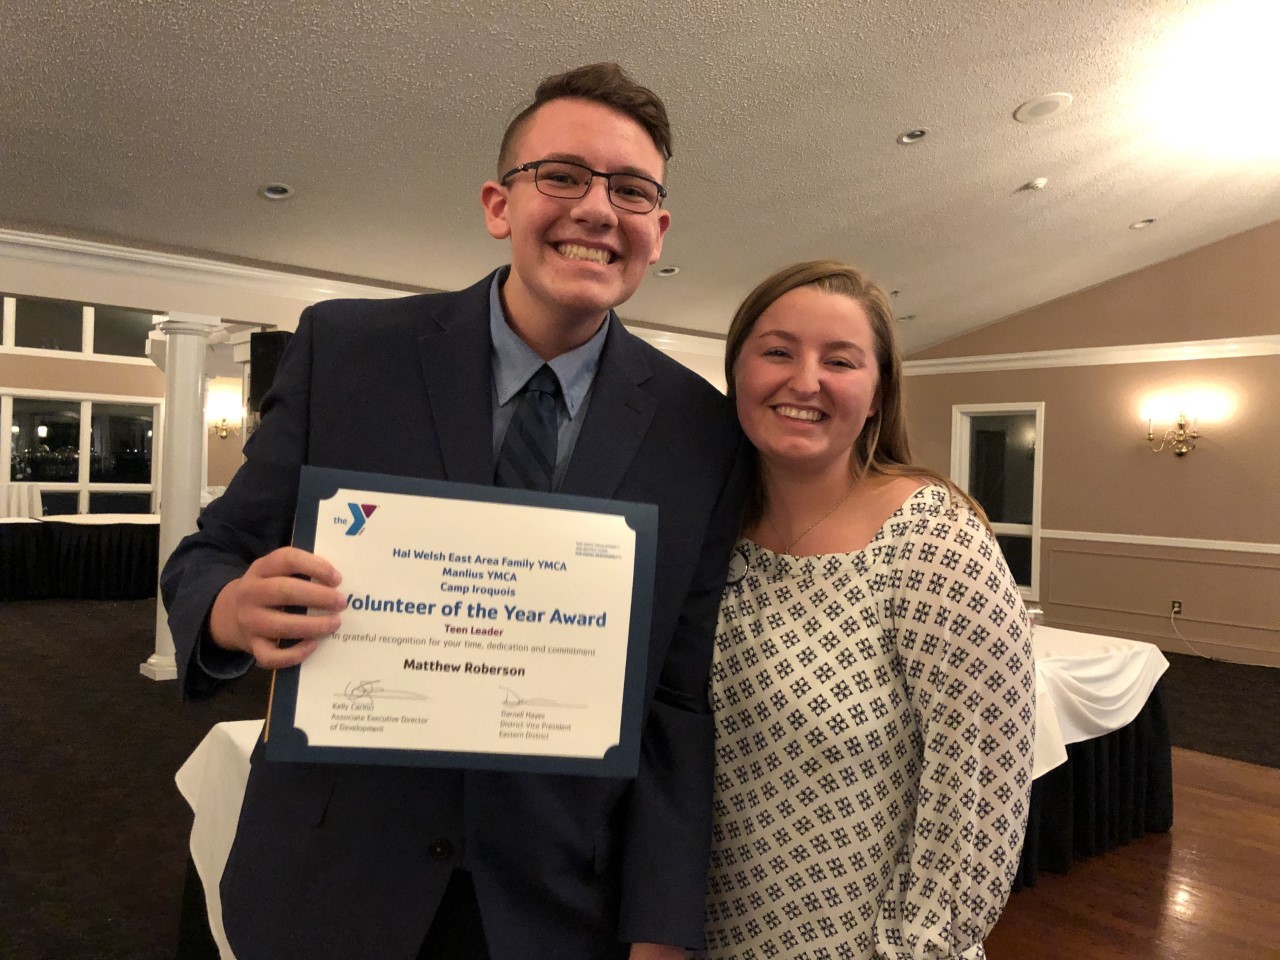 YMCA of Central New York Recognizes MPH Student